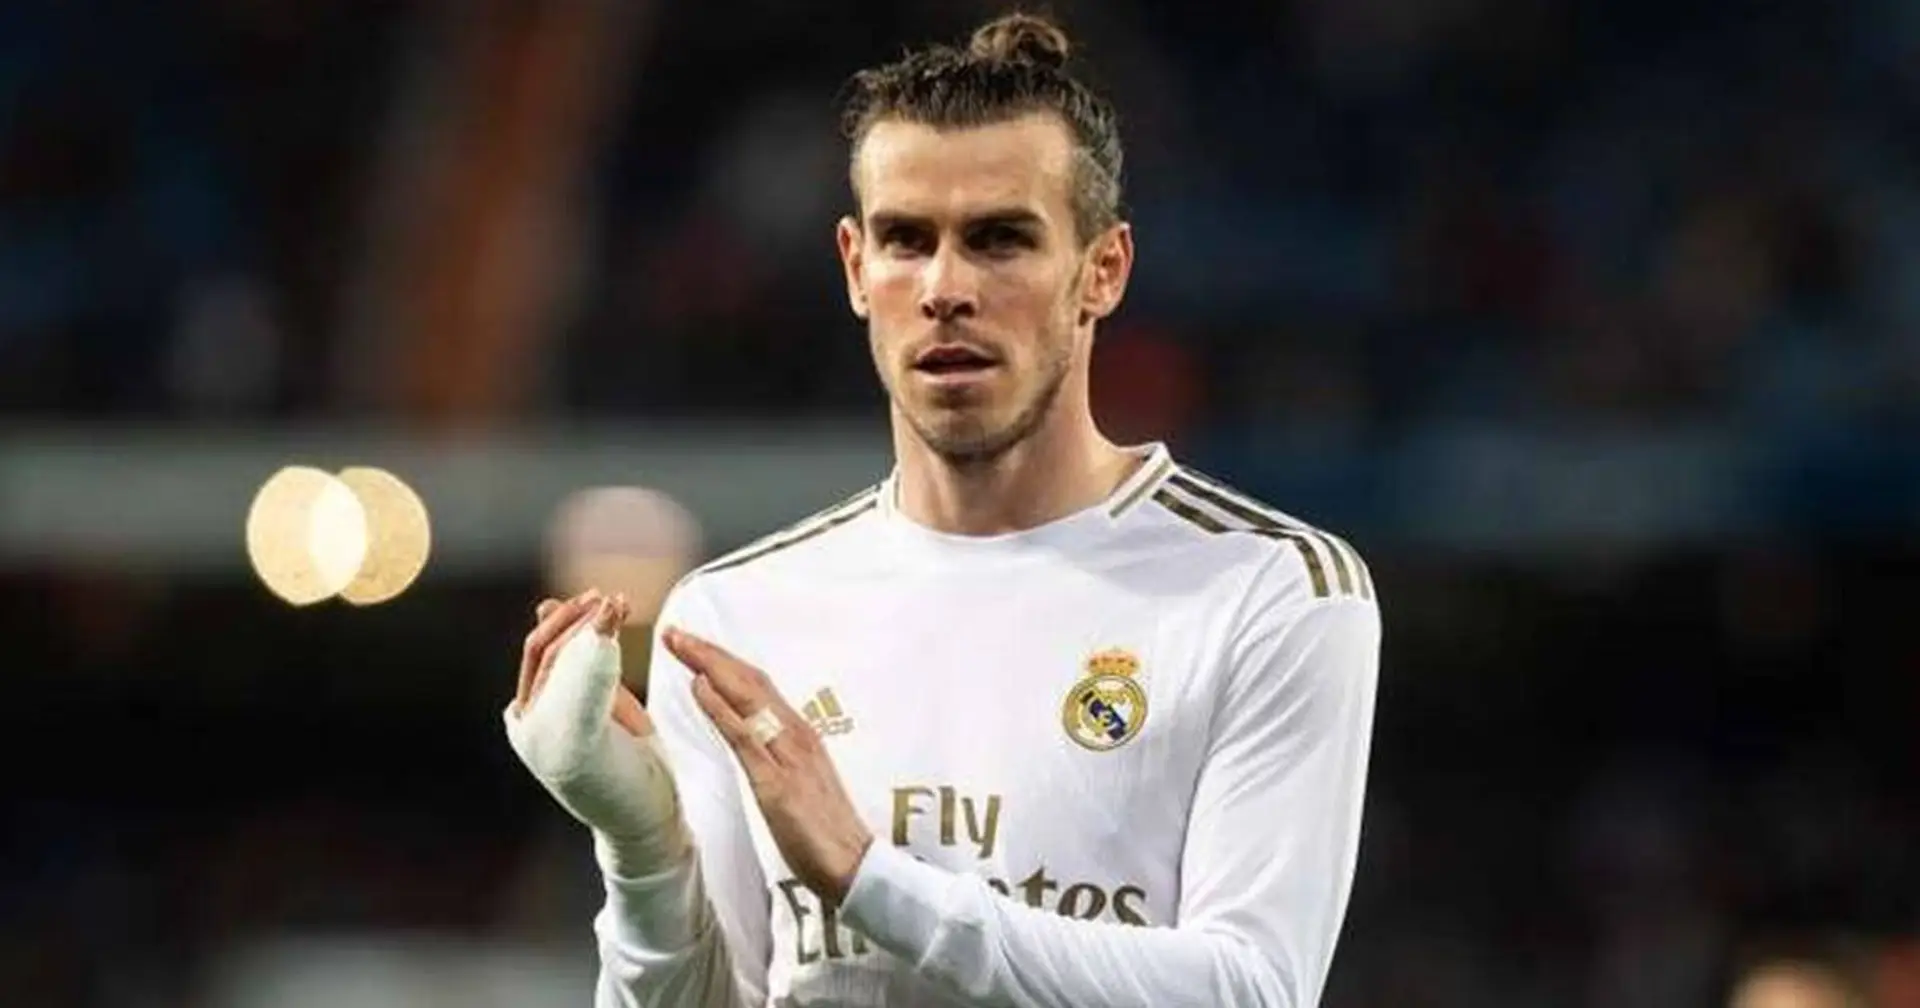 Madrid reportedly considering paying off Bale to terminate contract